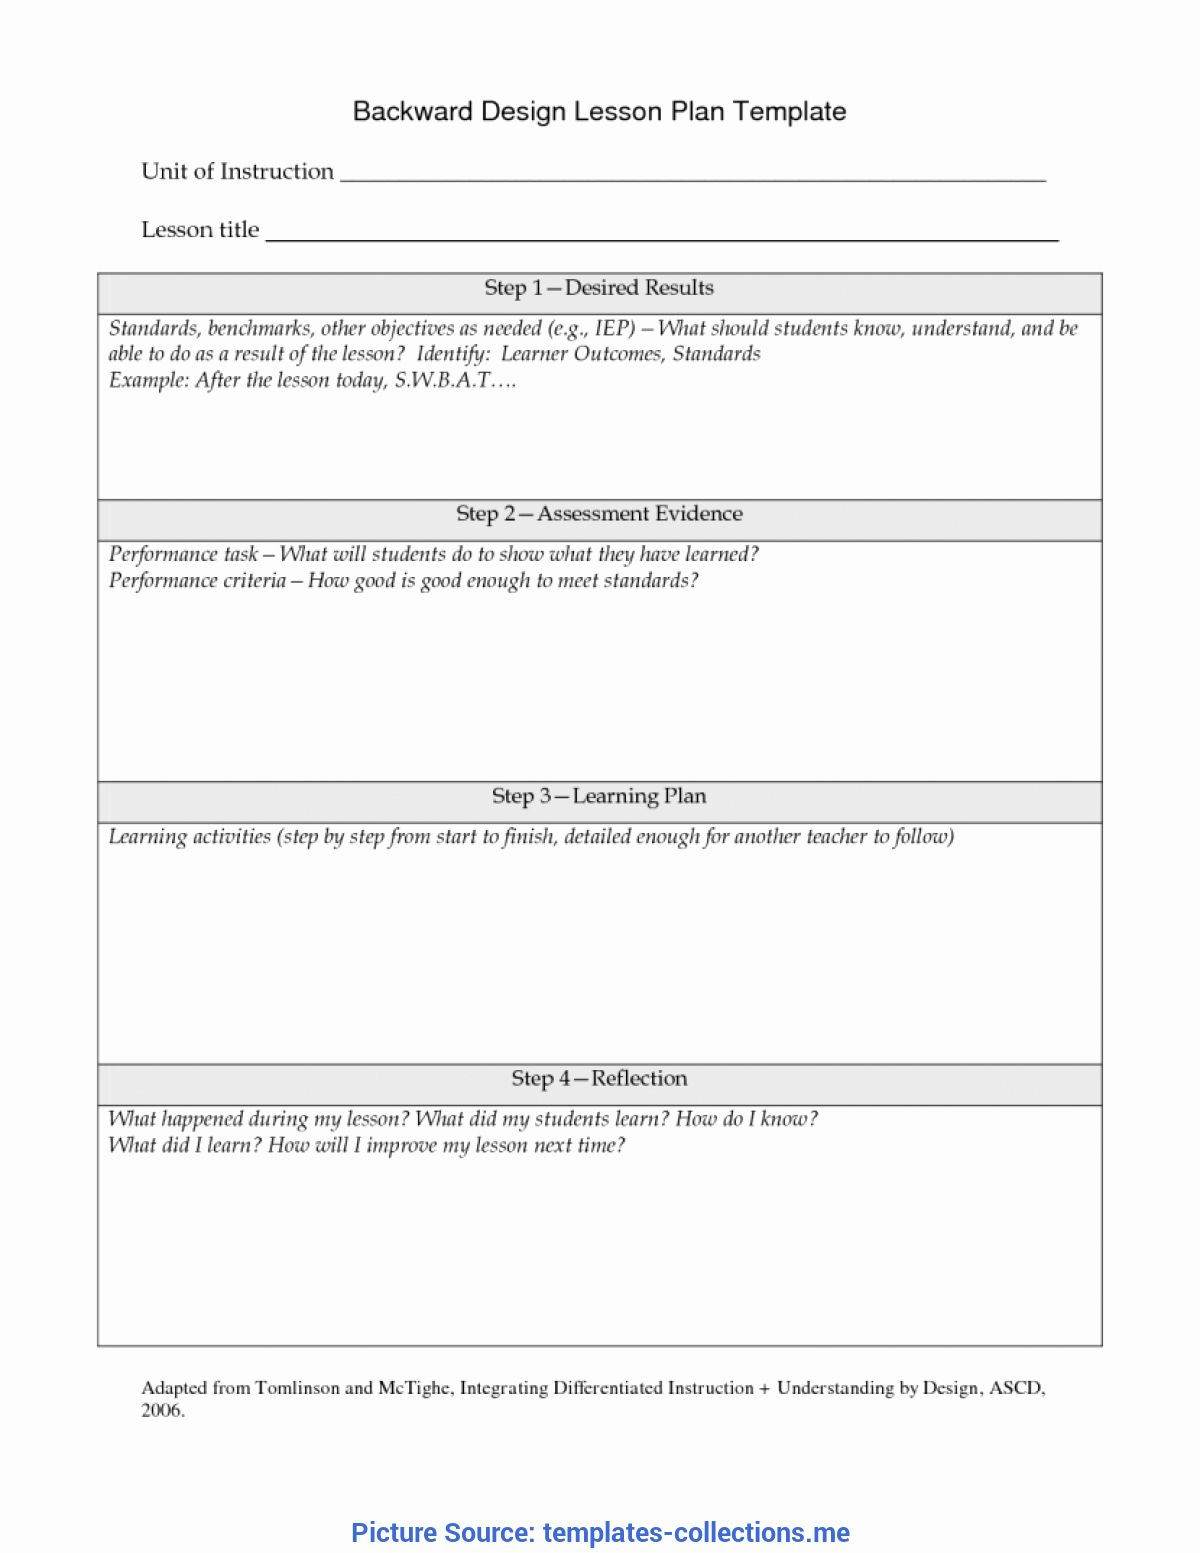 Differentiated Lesson Plan 25 Differentiated Lesson Plan Template In 2020